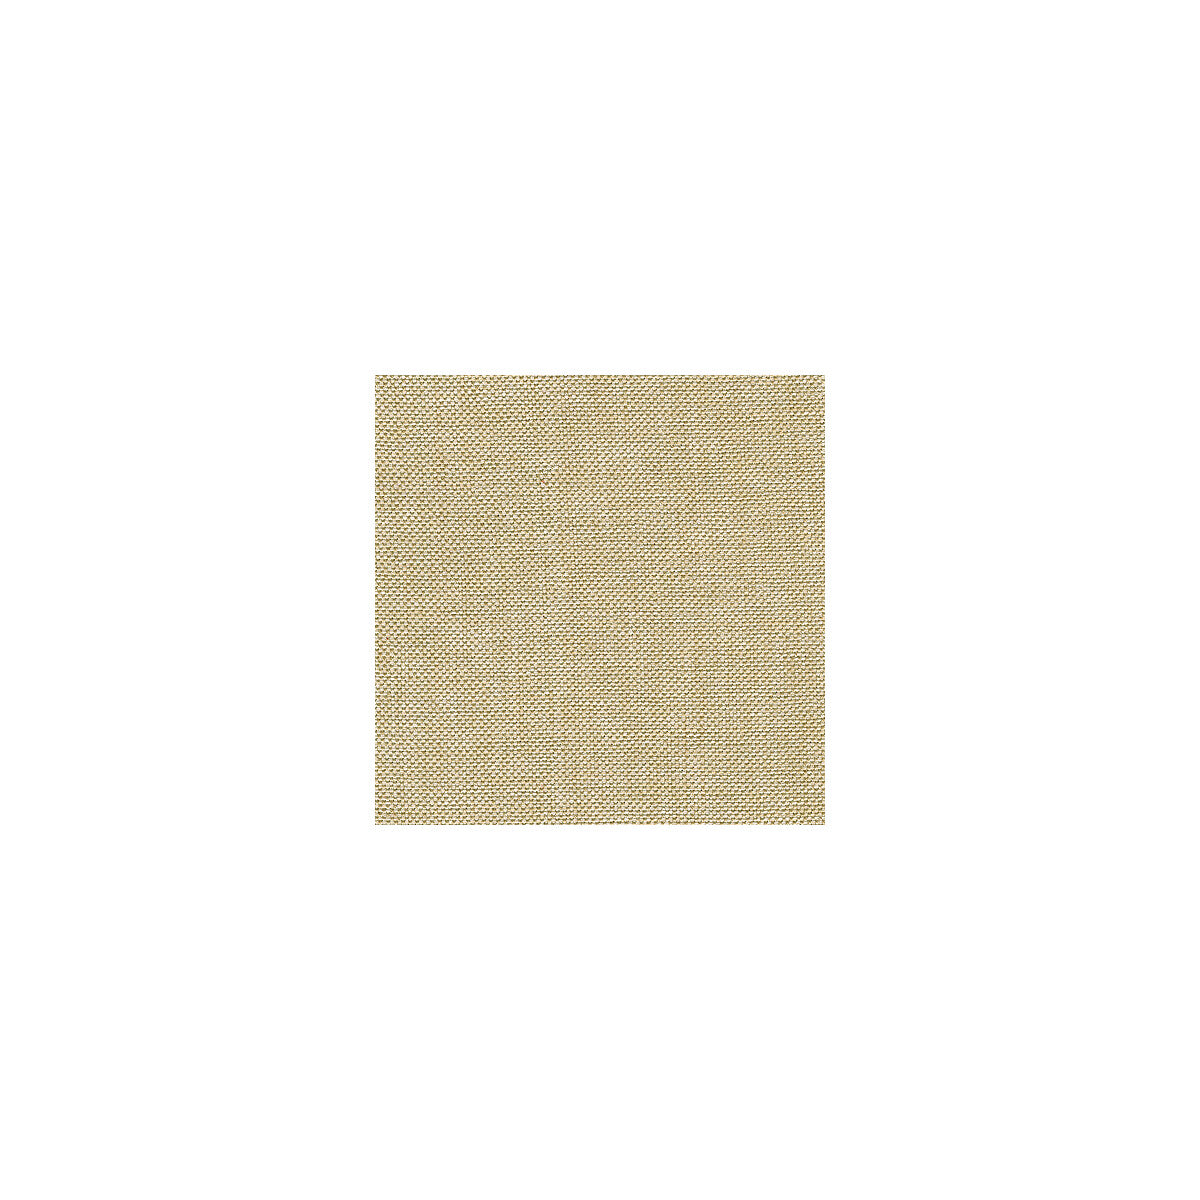 Kravet Basics fabric in 30299-116 color - pattern 30299.116.0 - by Kravet Basics in the Perfect Plains collection